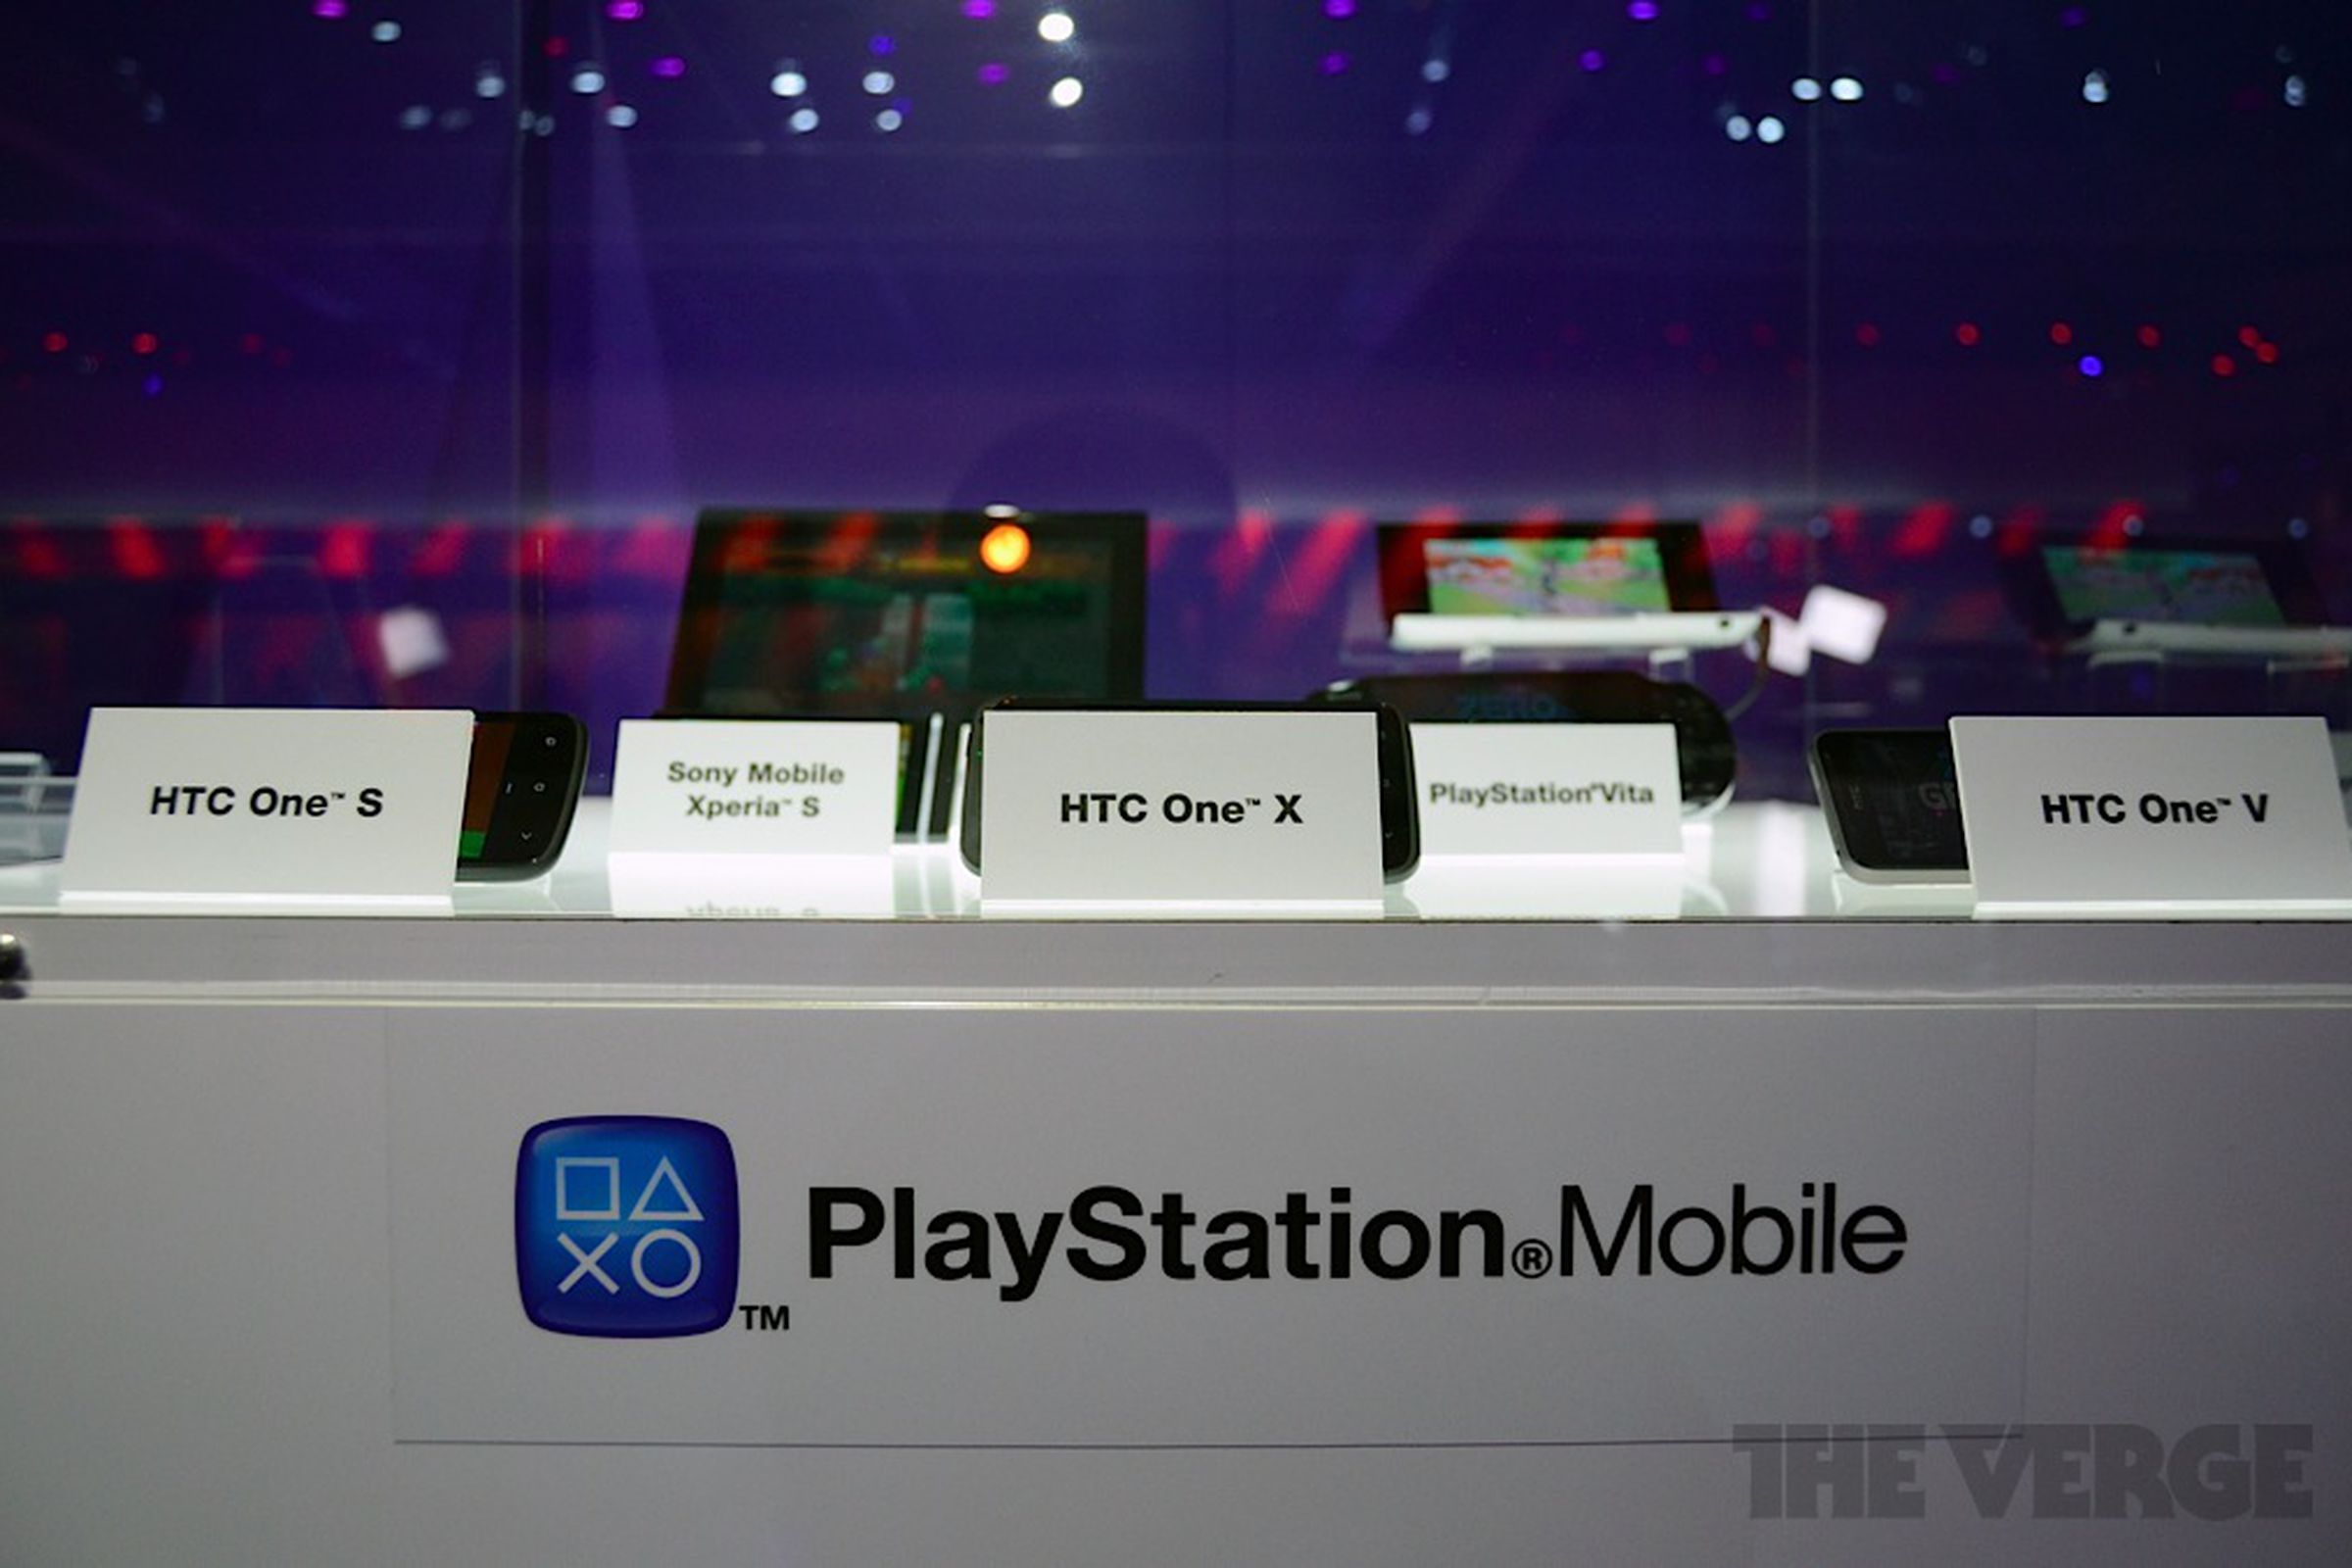 Gallery Photo: HTC One series with PlayStation Mobile